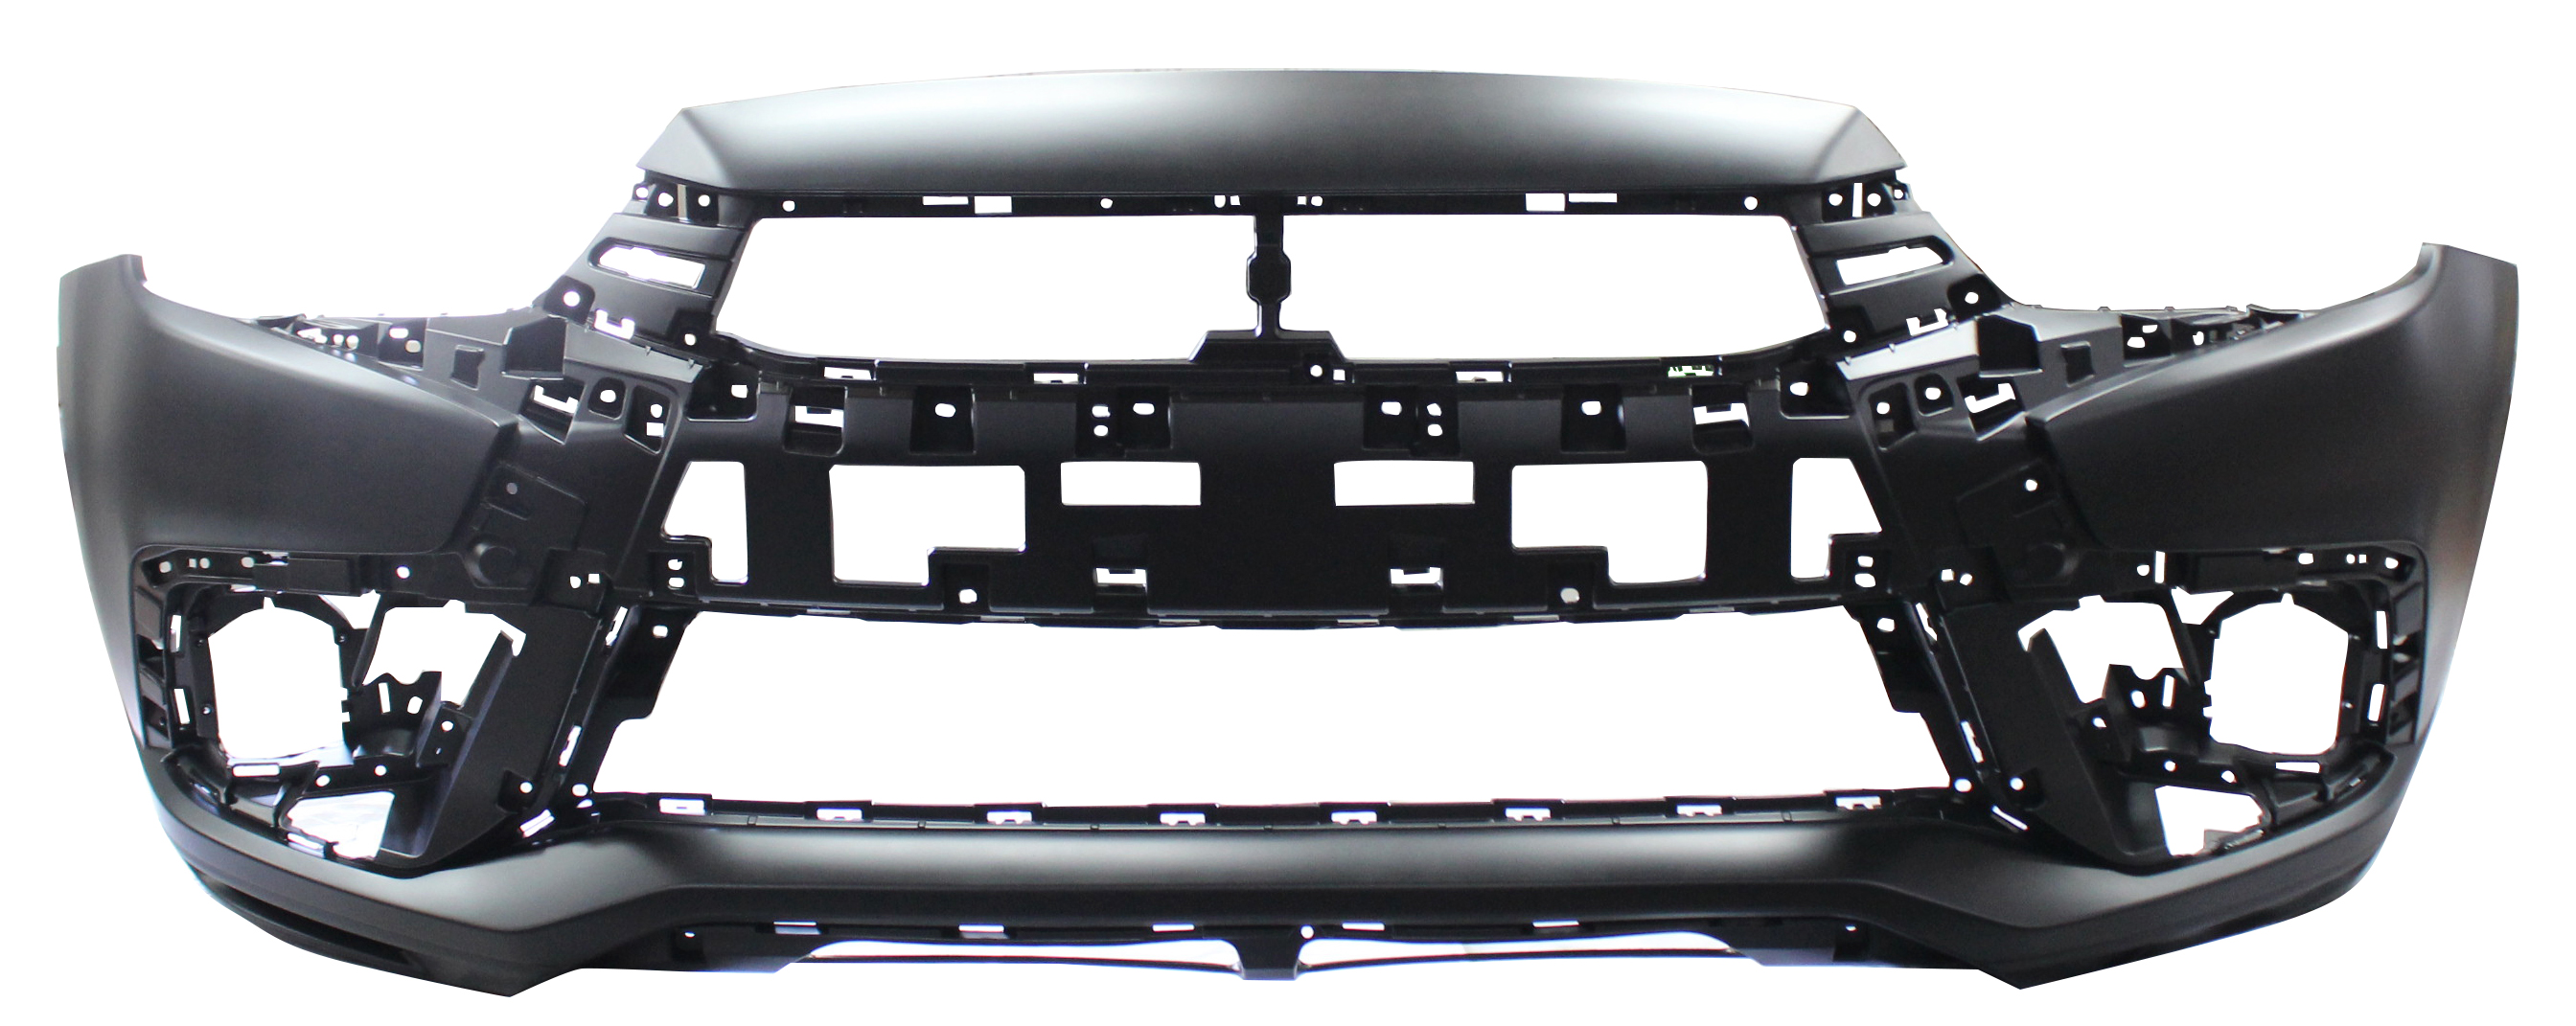 Aftermarket BUMPER COVERS for MITSUBISHI - OUTLANDER SPORT, OUTLANDER SPORT,18-19,Front bumper cover